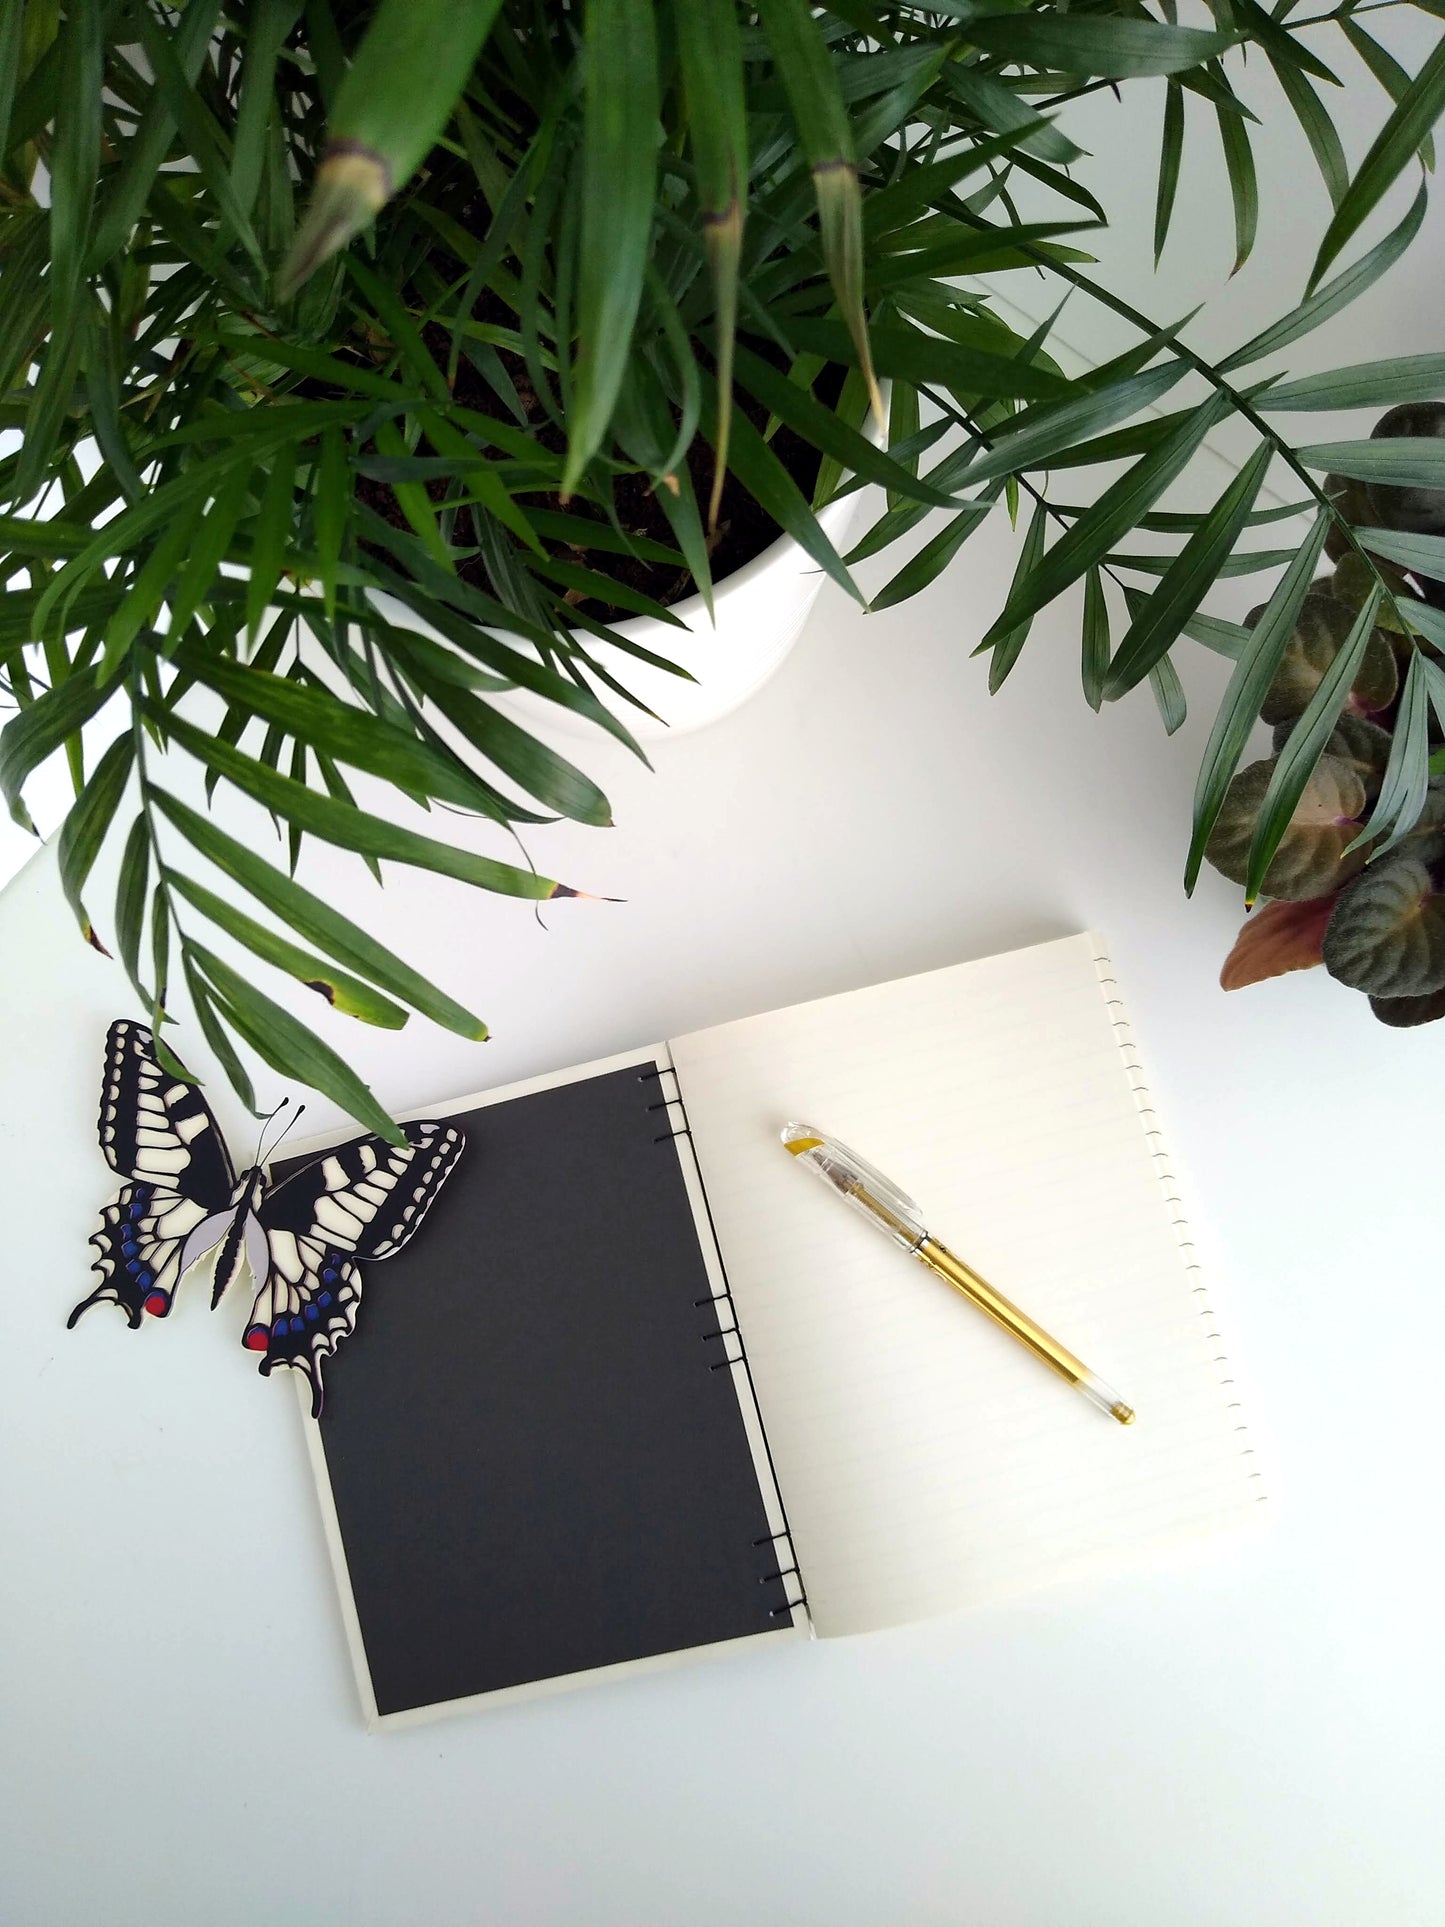 An open journal lays on a white desk next to two potted plants and a paper butterfly. The journal has a grey thread connecting the pages at the spine, dark grey endpapers and a blank, cream first sheet. A gold pen rests on top of the pages.